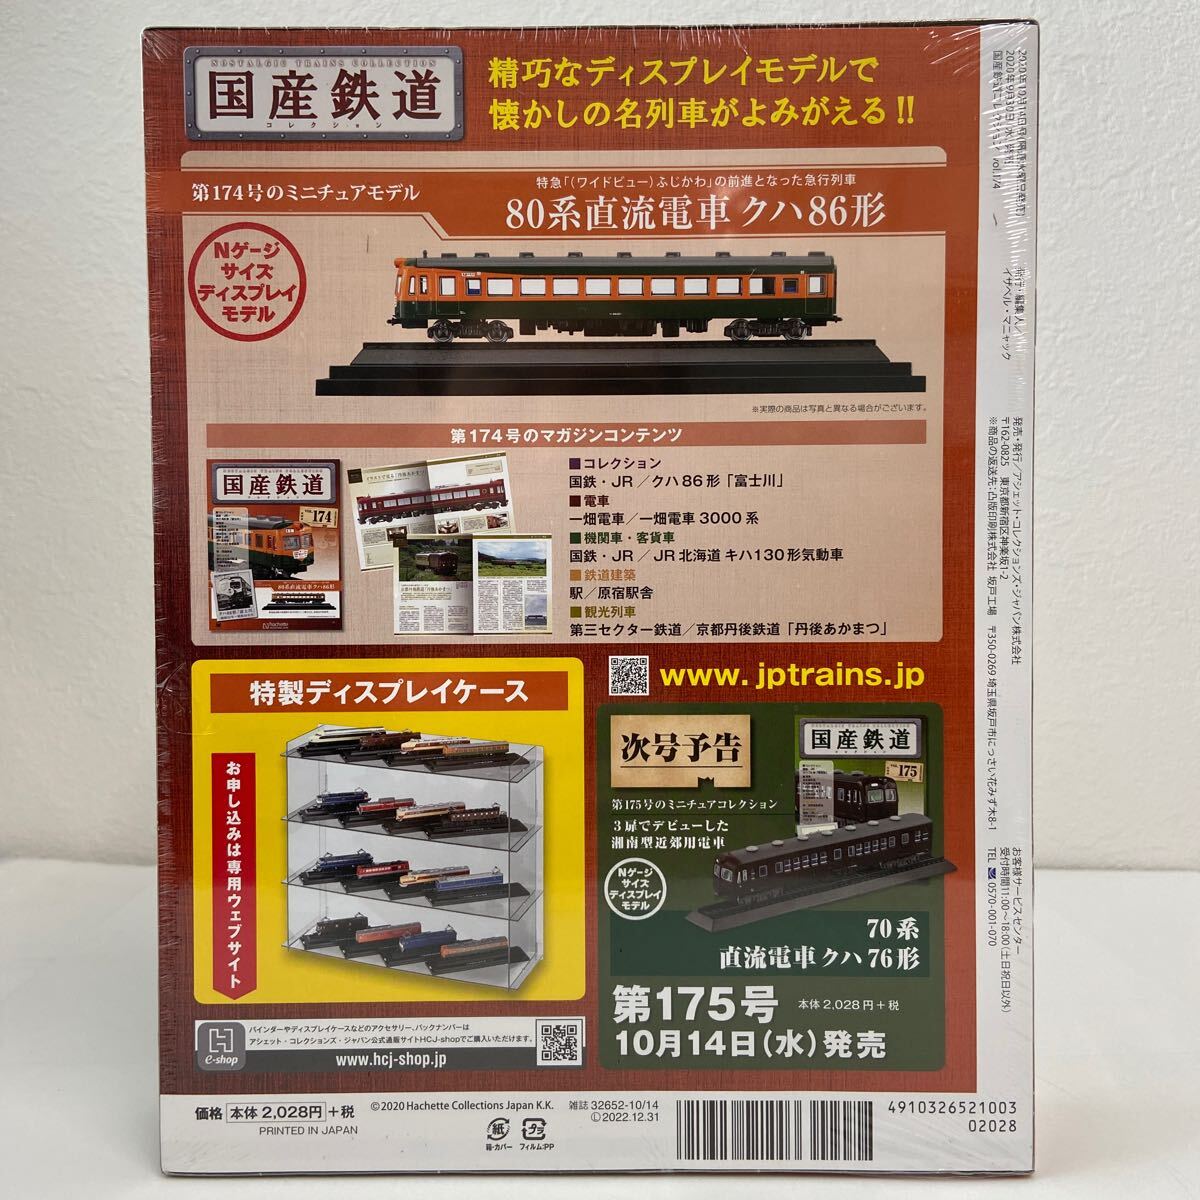 asheto domestic production railroad collection #174 80 series direct current train k is 86 shape Fuji river N gauge size display model miniature model 